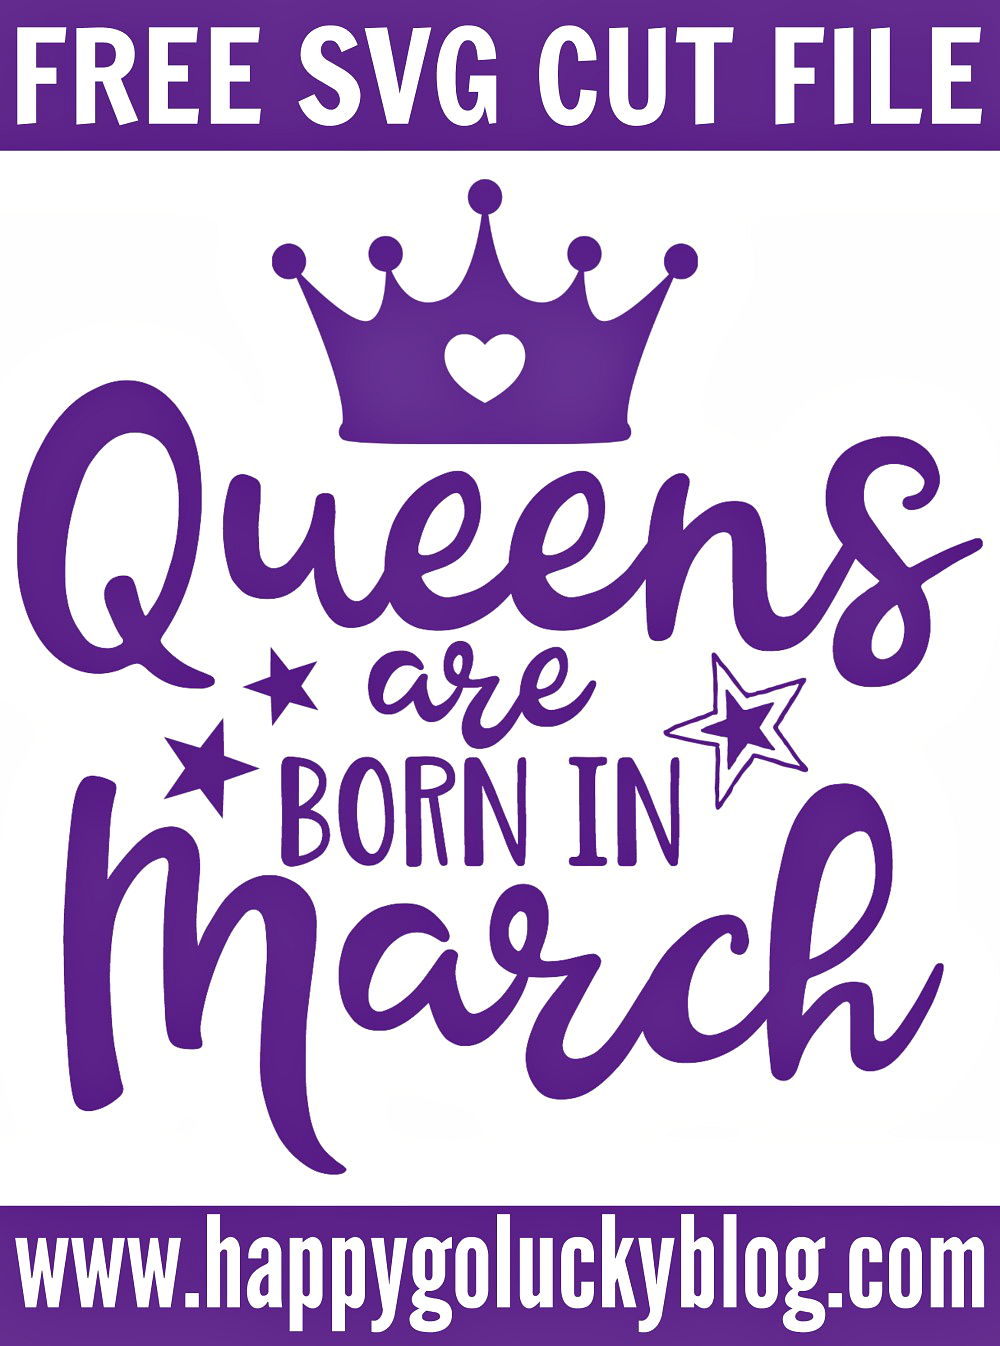 https://www.happygoluckyblog.com/wp-content/uploads/2018/03/Queens-are-born-in-March-SVG-Cut-File.png